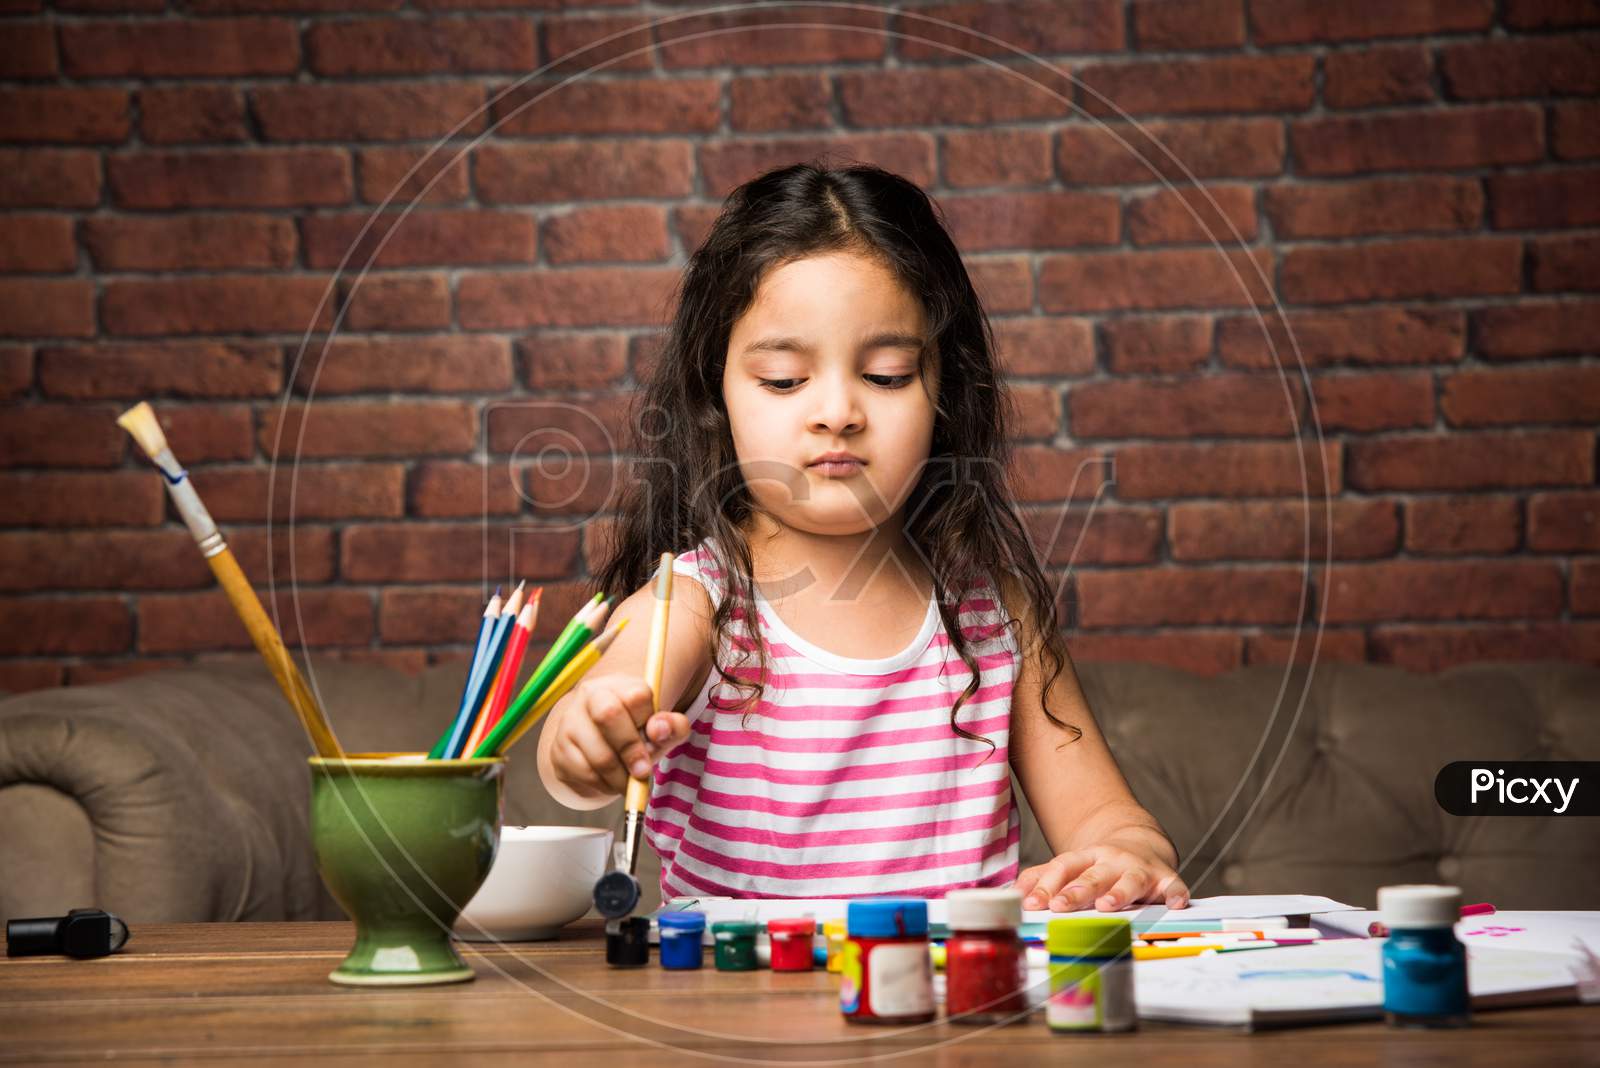 Indian small girl drawing / Painting with colours over paper, selective focus